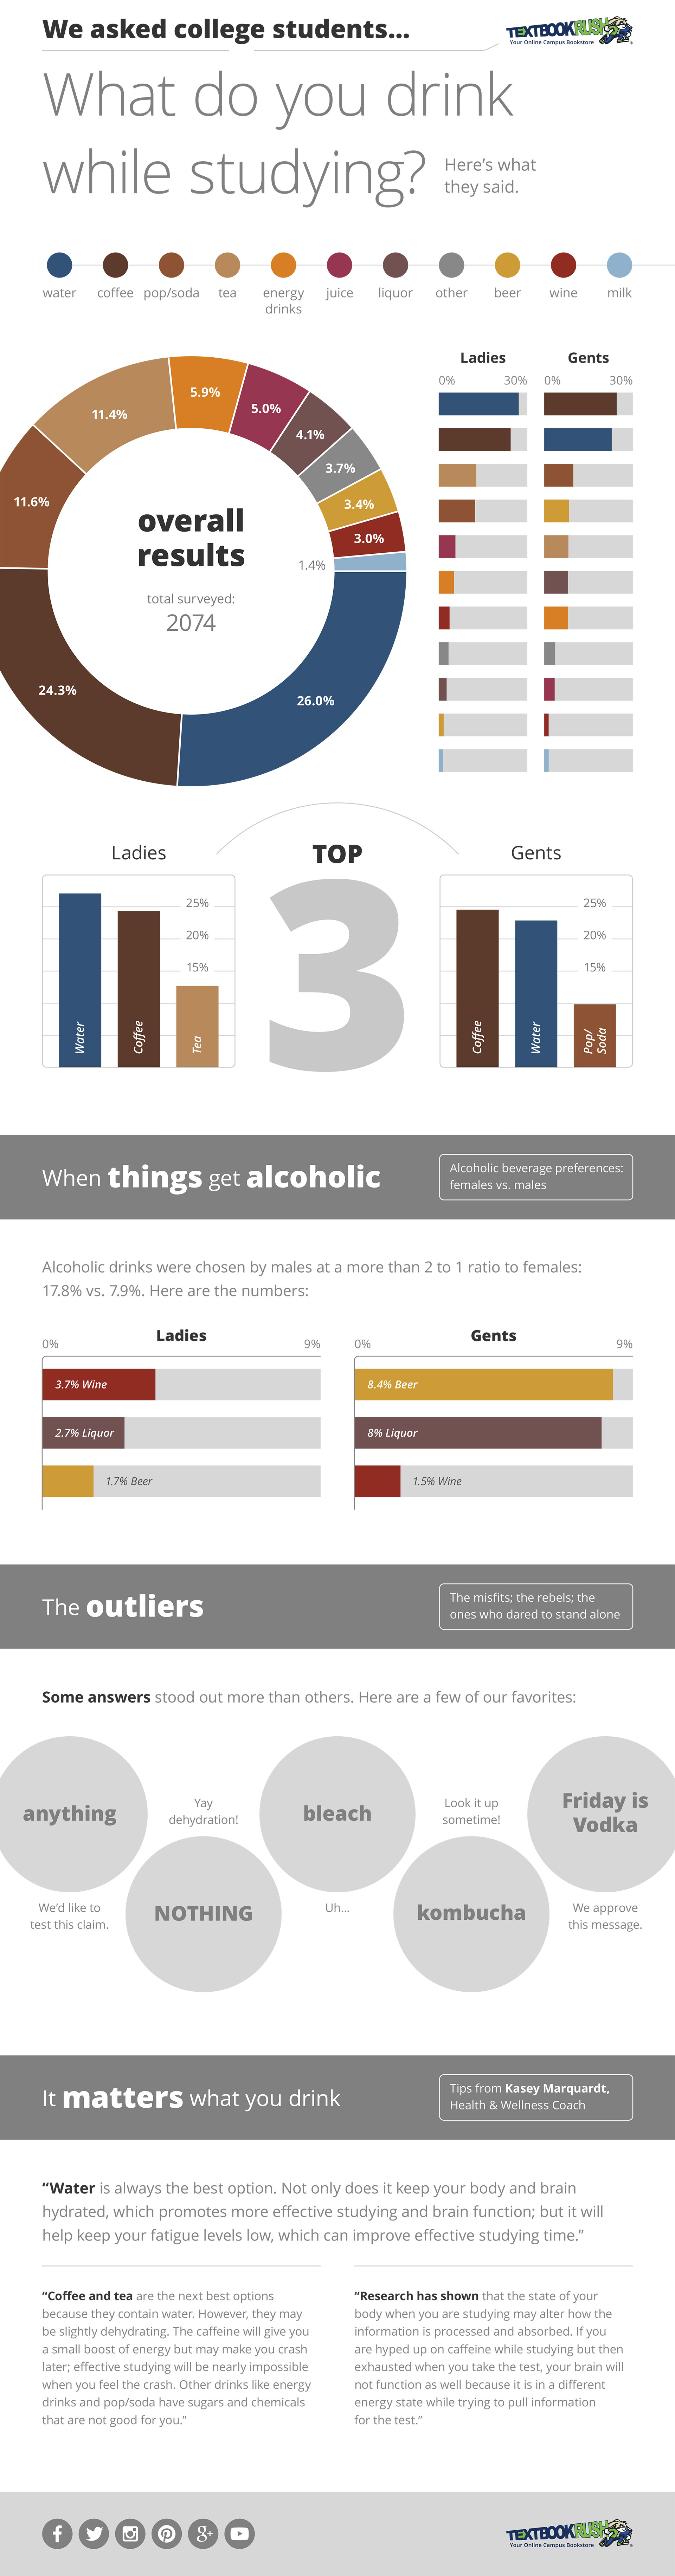 We asked college students... what do you drink while studying? Here's what they said.